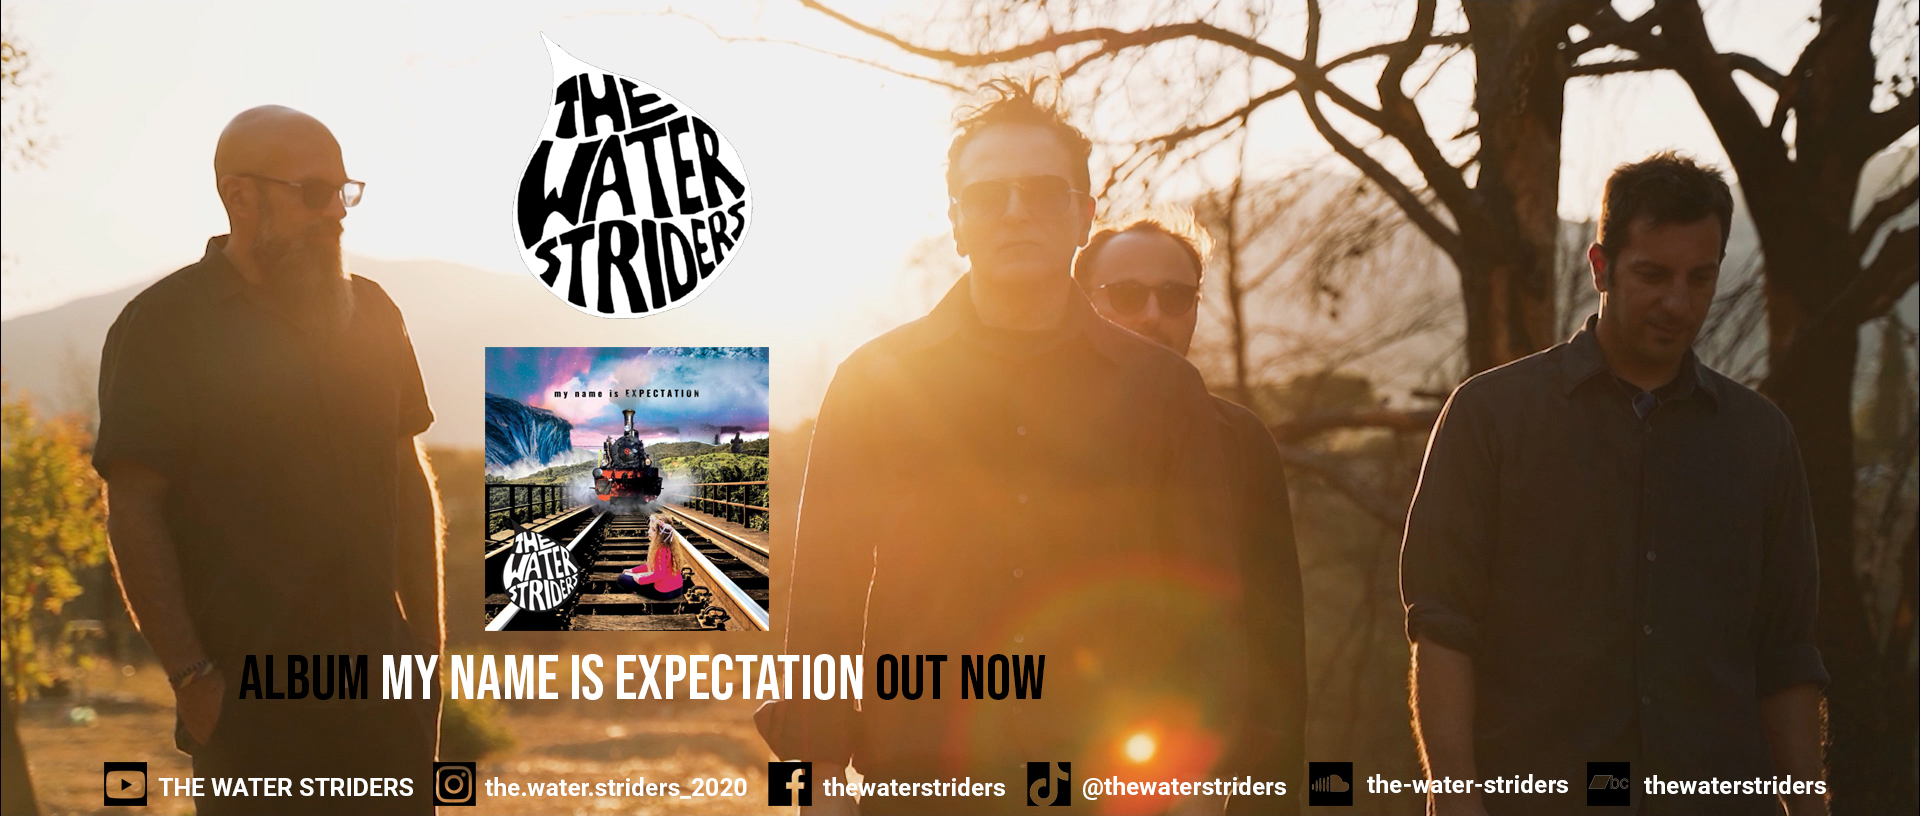 THE WATERSTRIDERS – singles “Love Is A Friend” and “Can I Settle For a Night?” από το άλμπουμ  ¨My name is EXPECTATION”